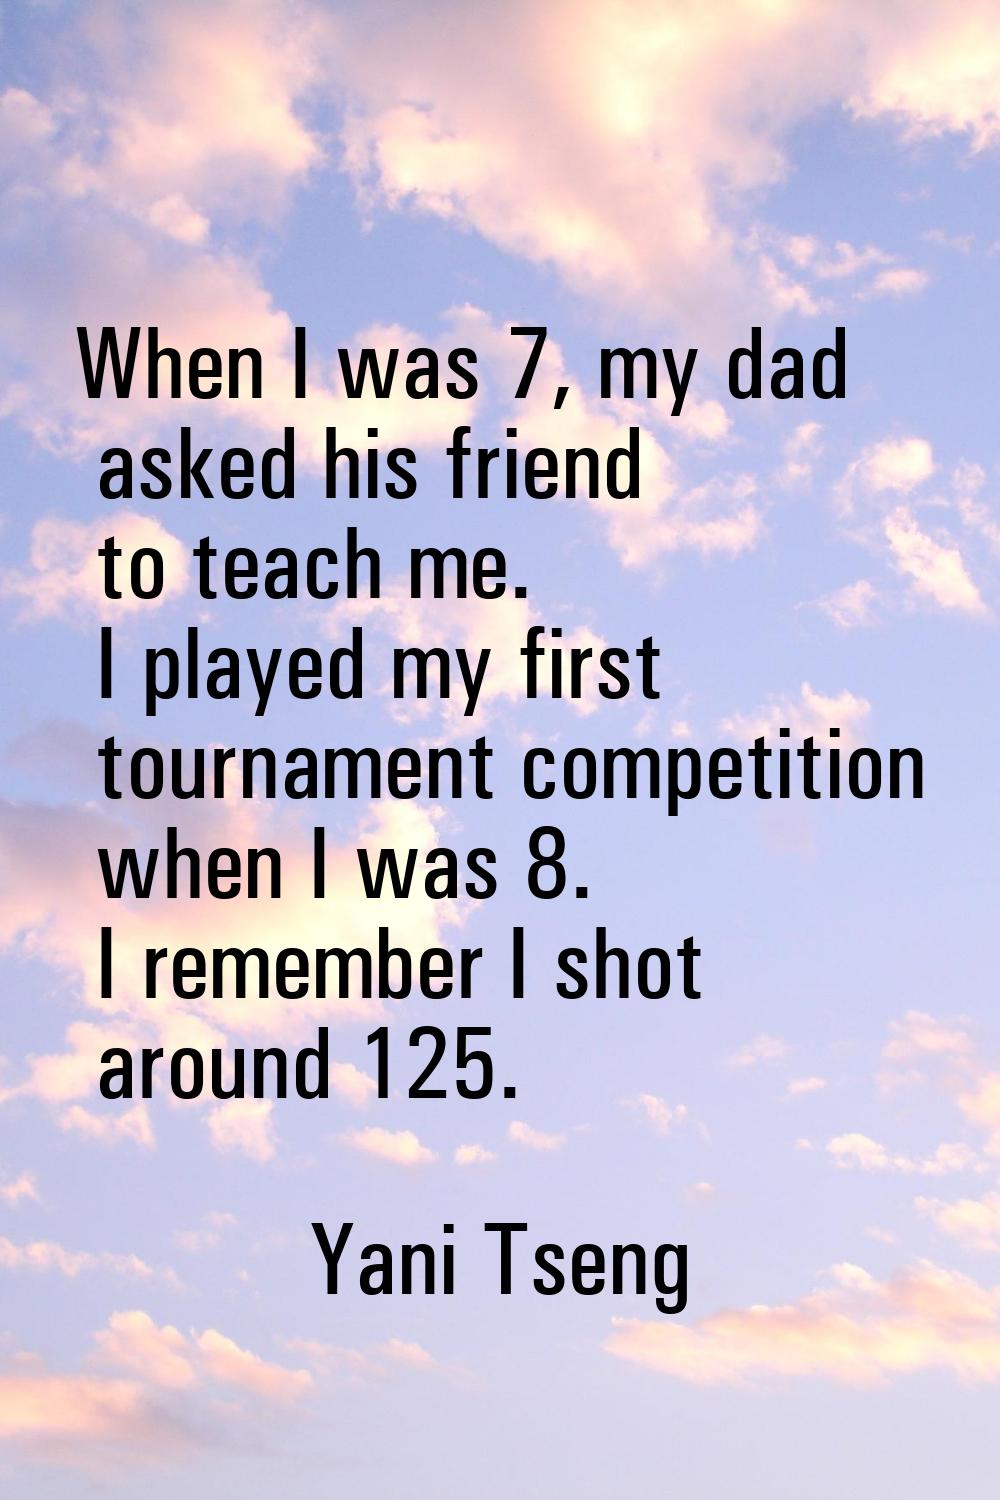 When I was 7, my dad asked his friend to teach me. I played my first tournament competition when I 